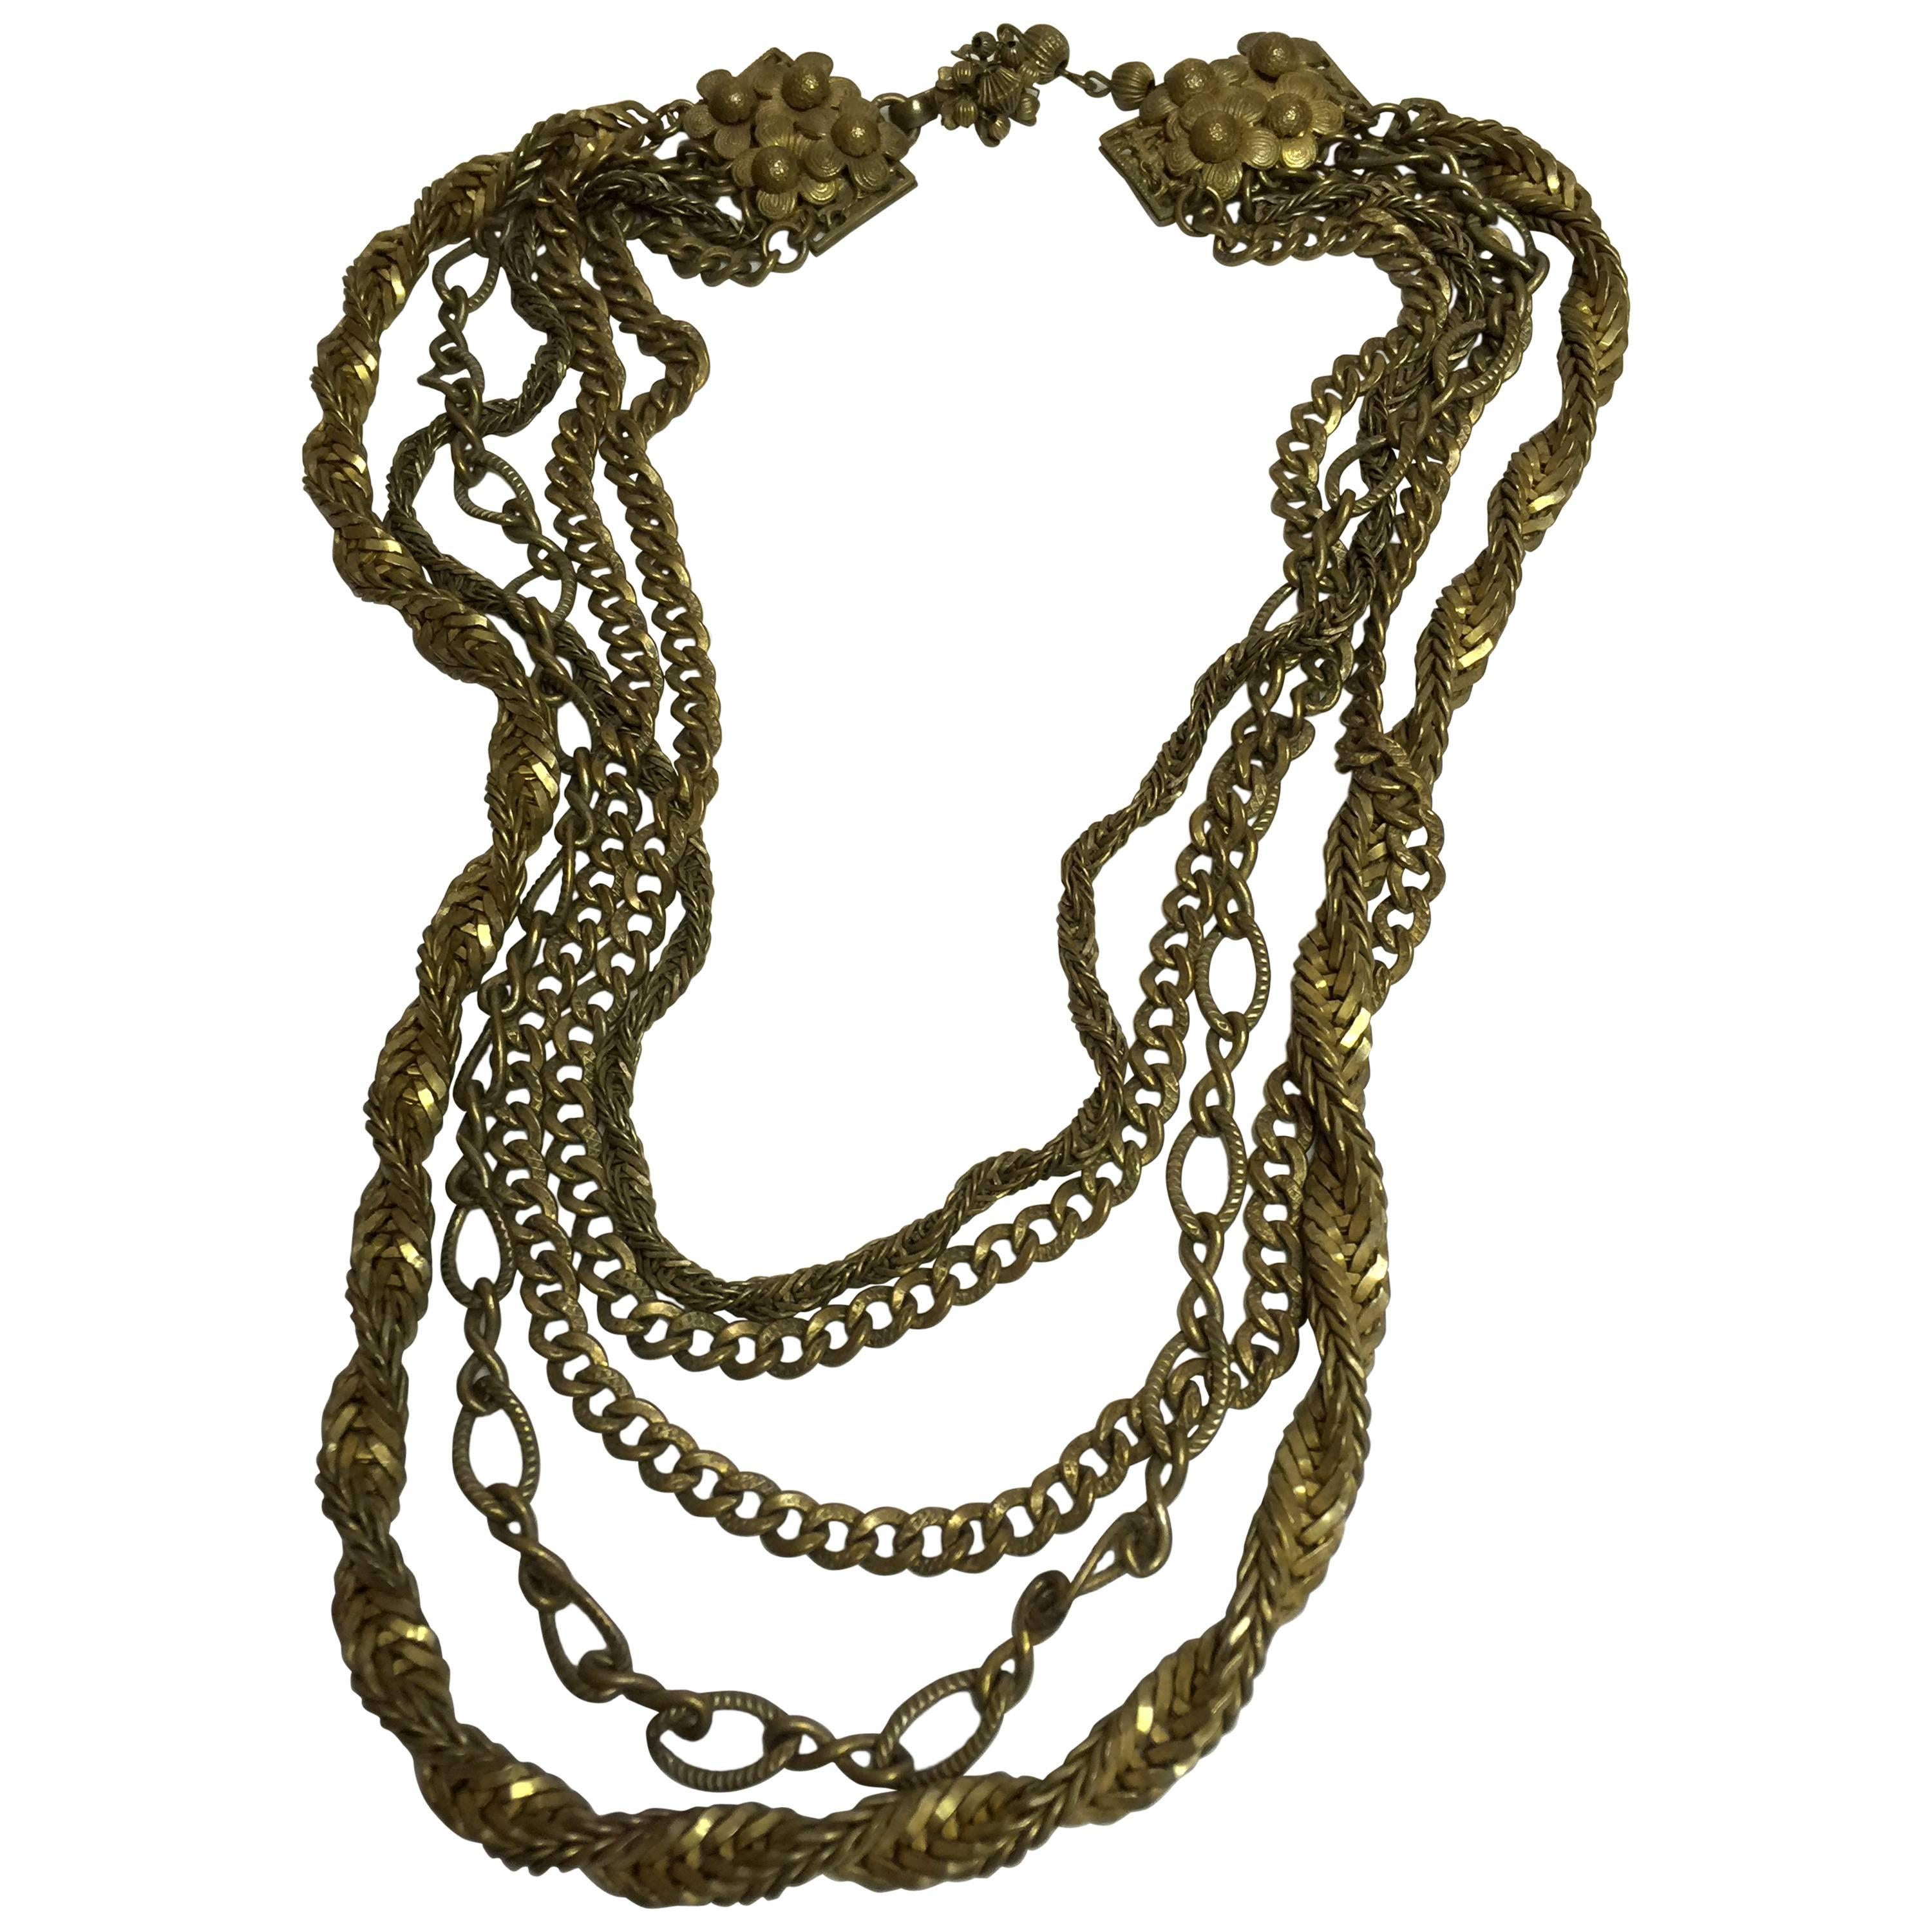 1950s MIRIAM HASKELL Antiqued Goldtone Multi-chain Necklace